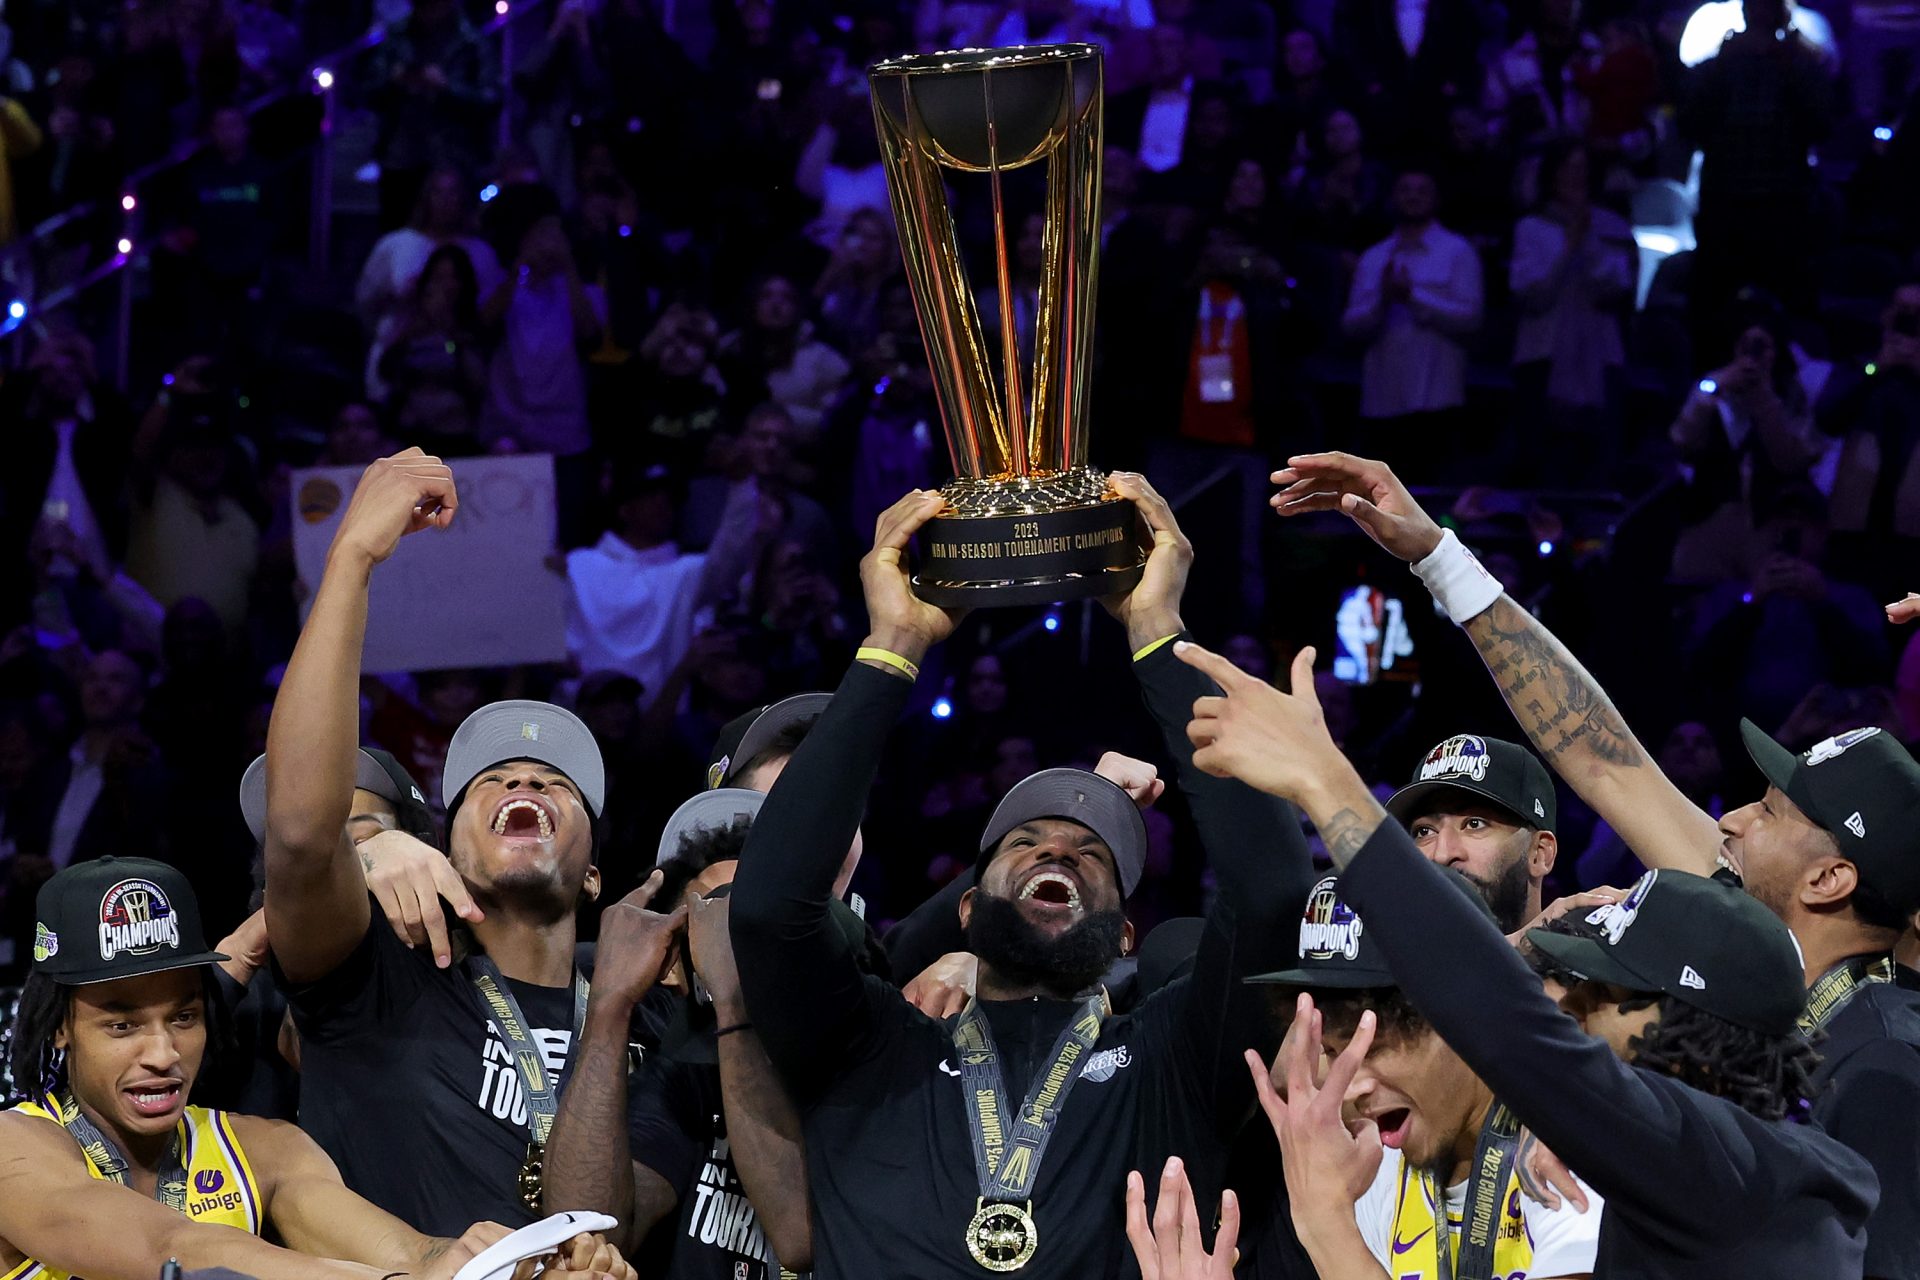 Simply the best: Who are the top 10 NBA Championship teams of All Time?